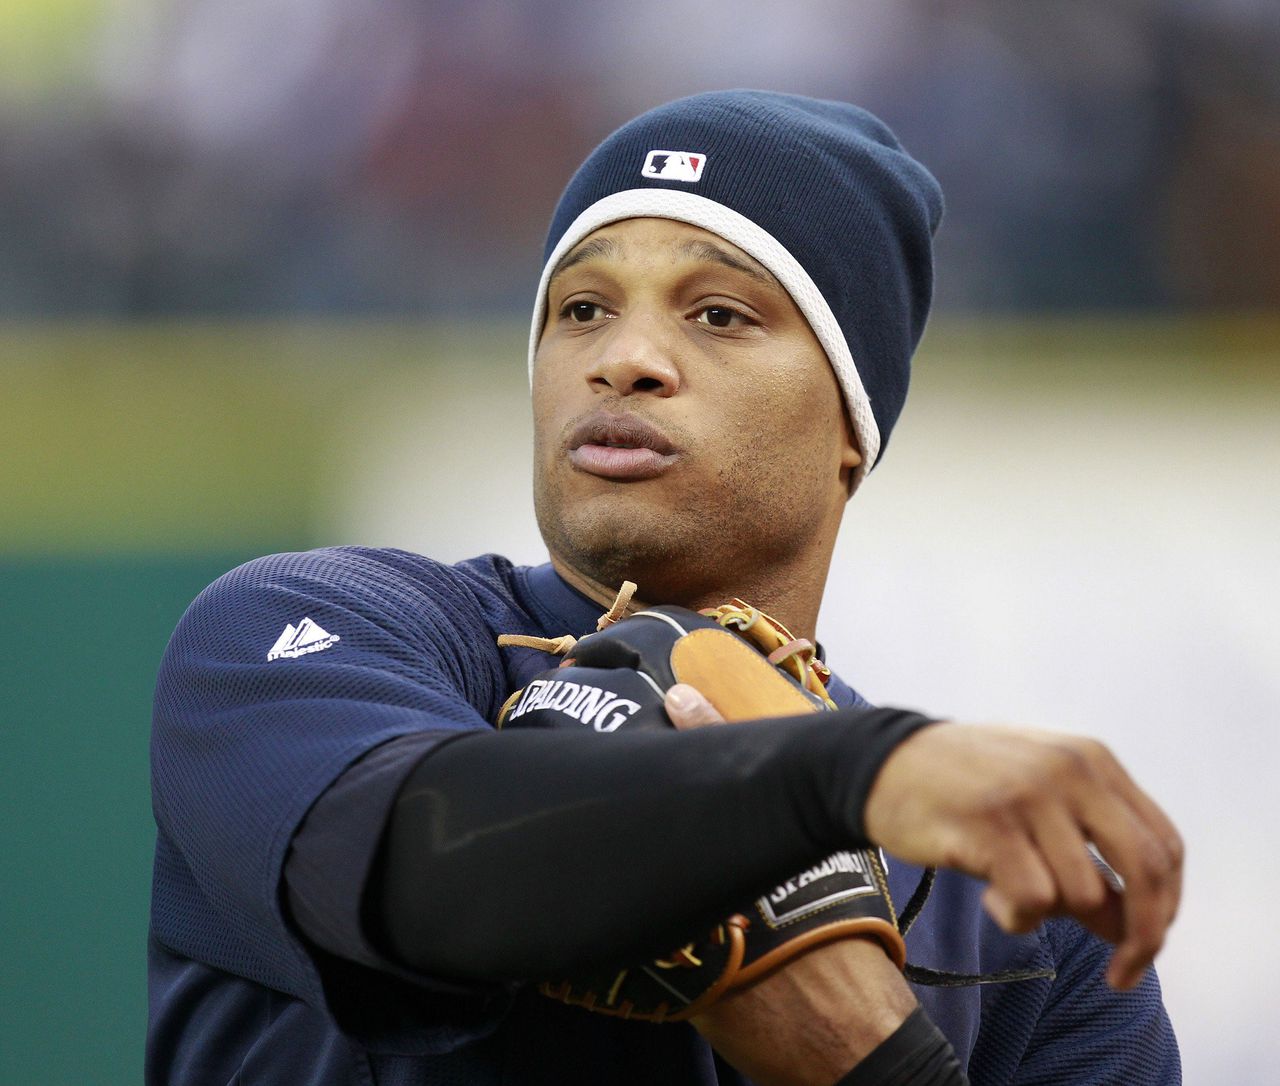 Former player of the New York Yankees, Robinson Cano